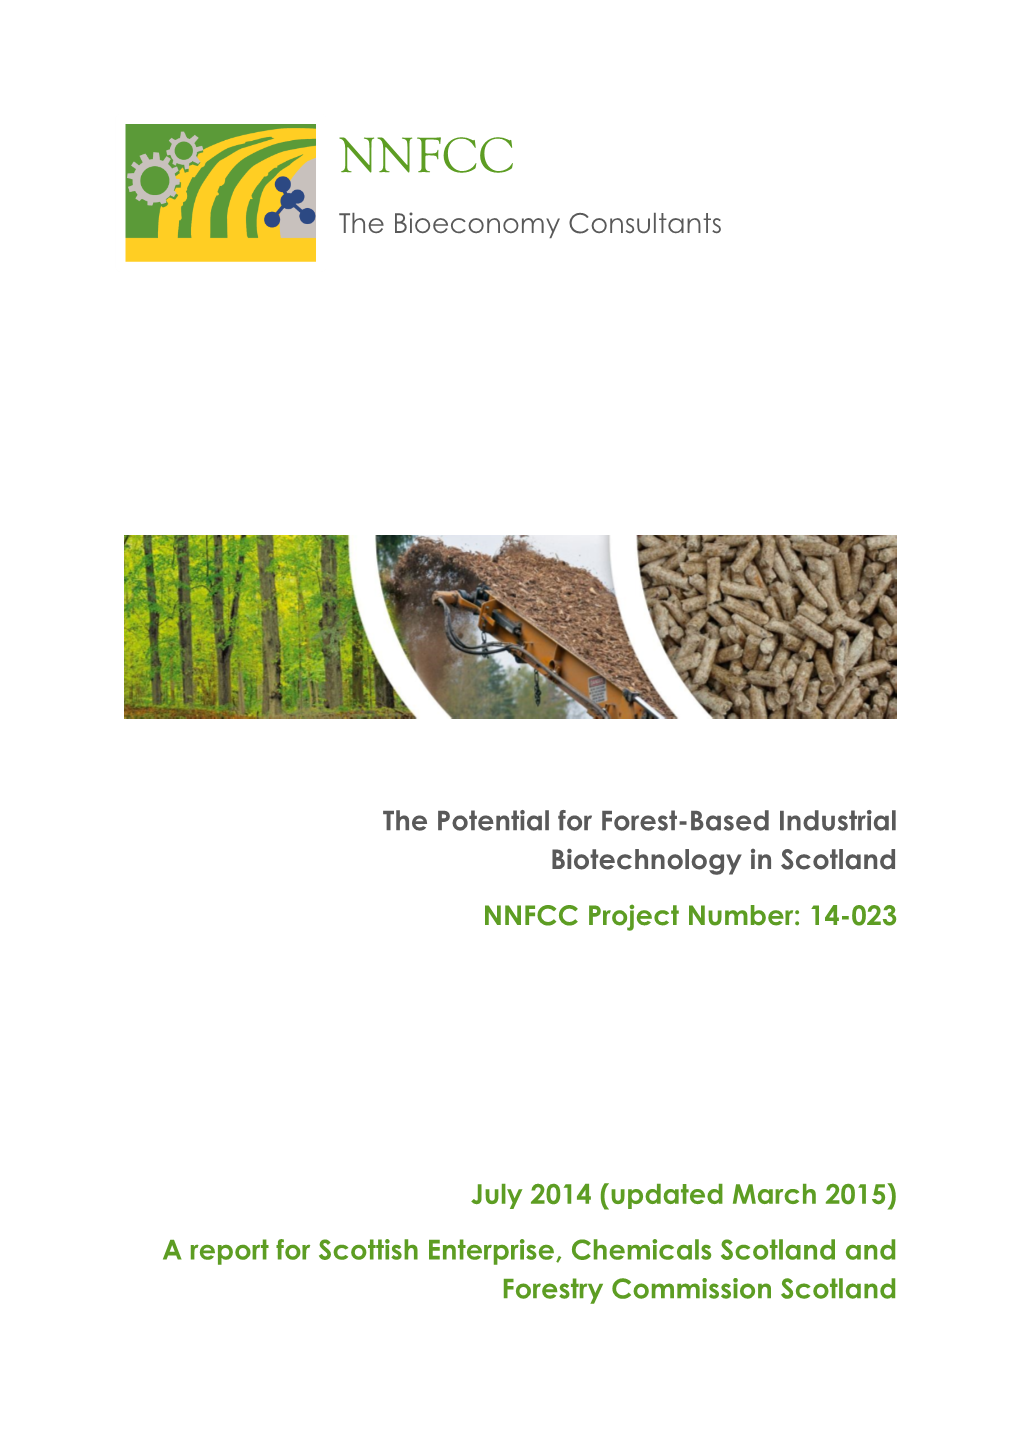 The Bioeconomy Consultants the Potential for Forest-Based Industrial